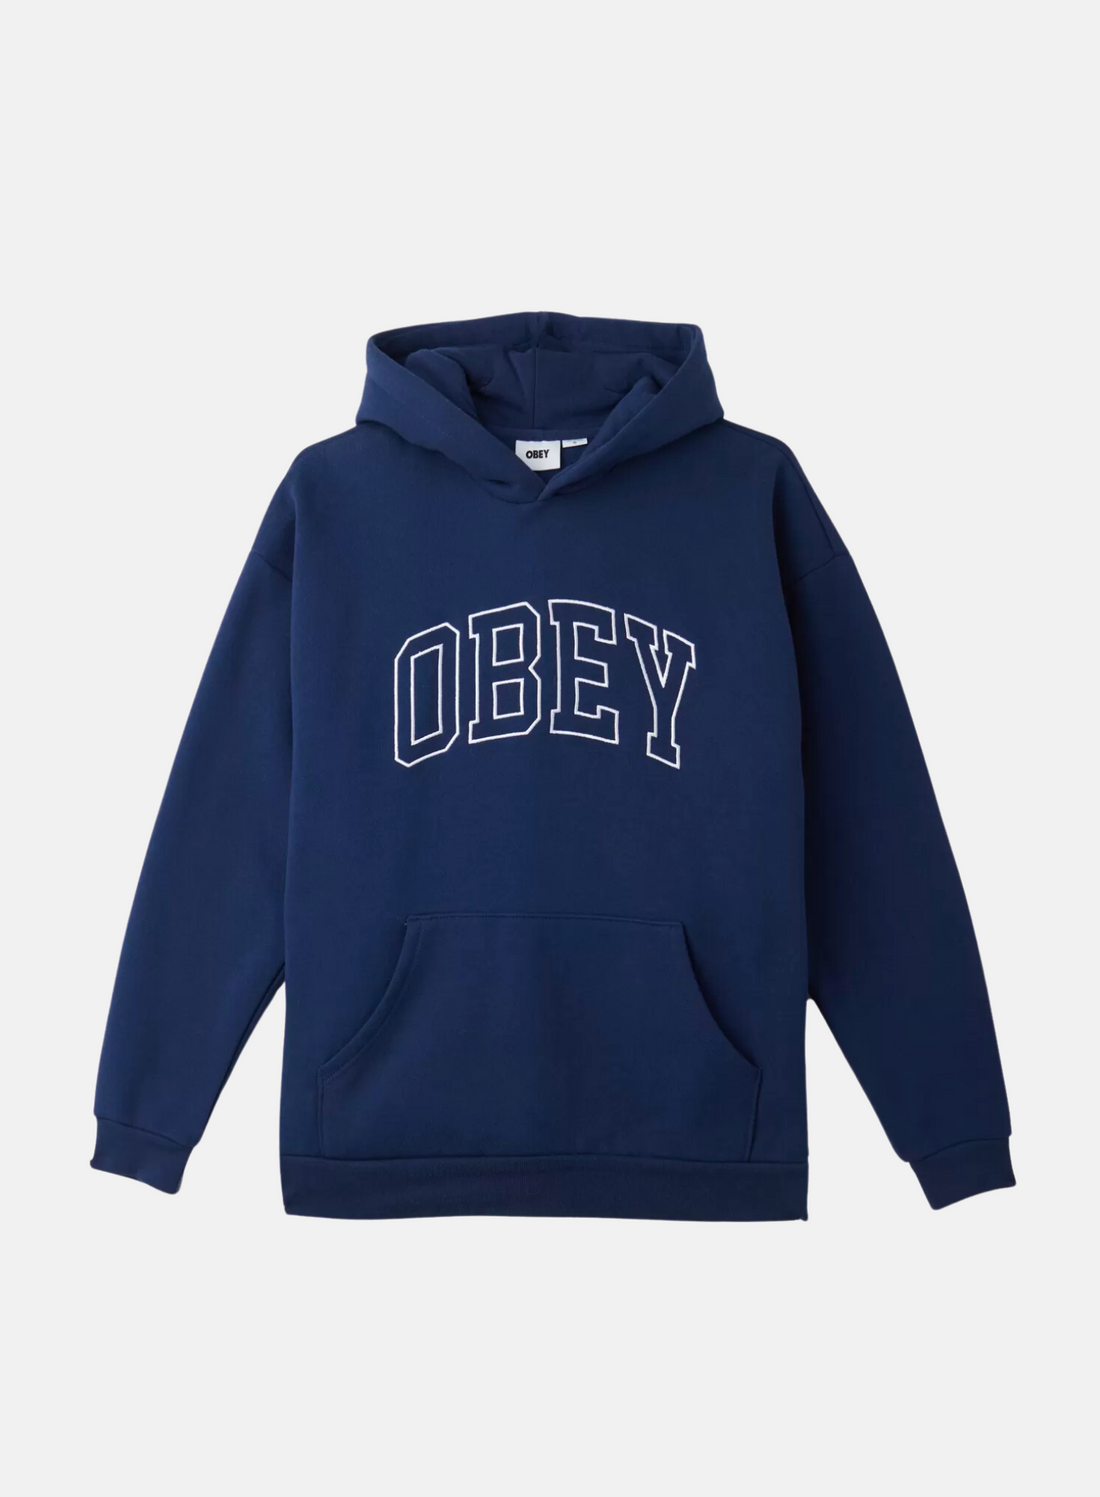 OBEY Collega Extra Heavy Hoodie Navy - Hympala Store 